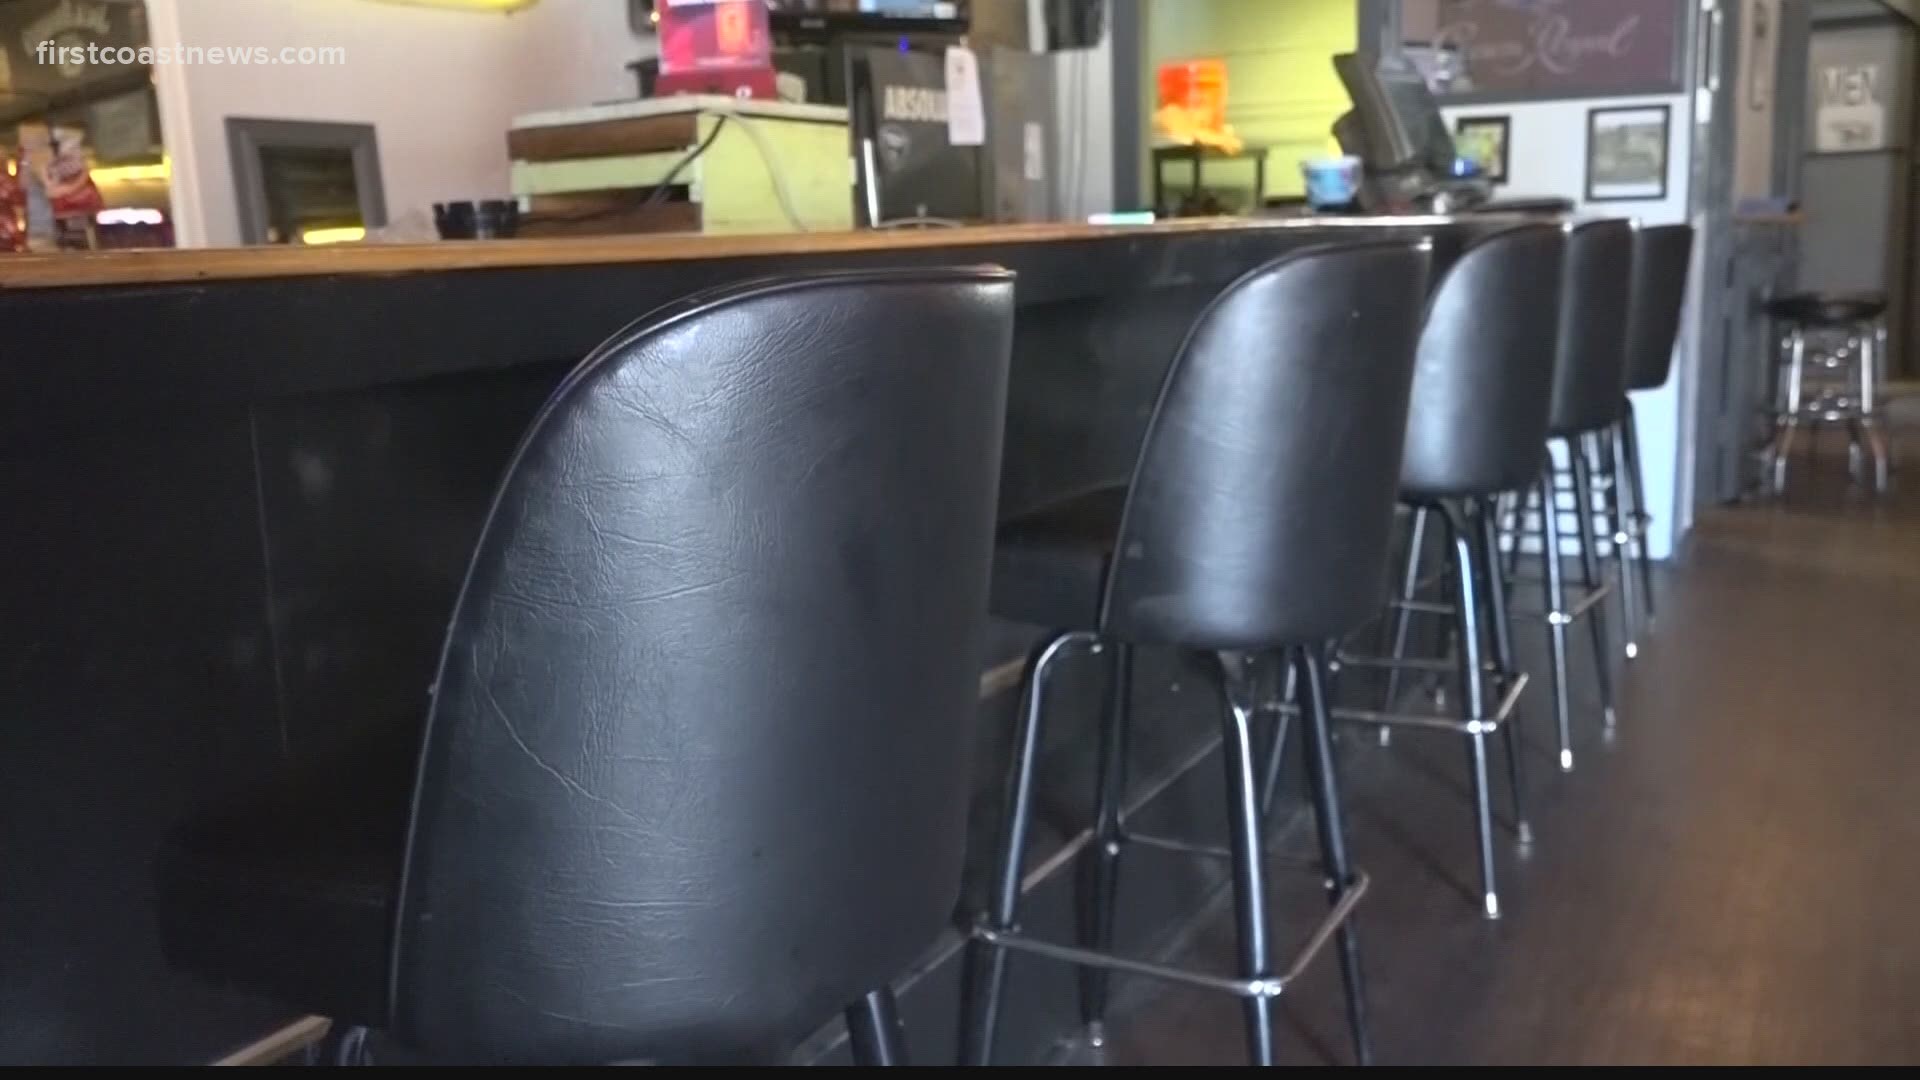 The owner of Ginger's Place wants in-person capacities increased as she's had to reduce staff work hours.